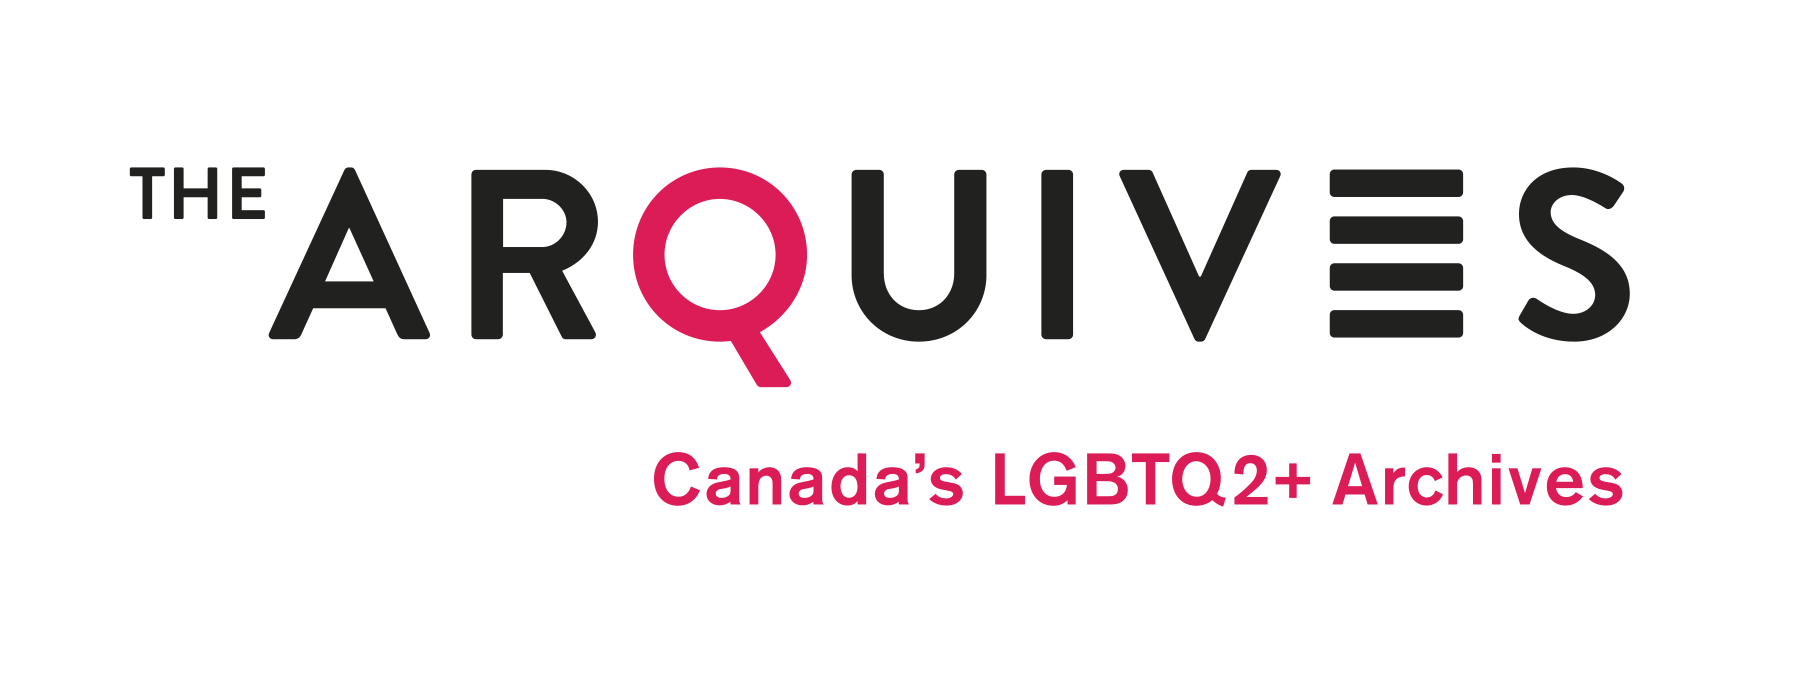 The Arquives Canada's LGBTQ2+ Archives